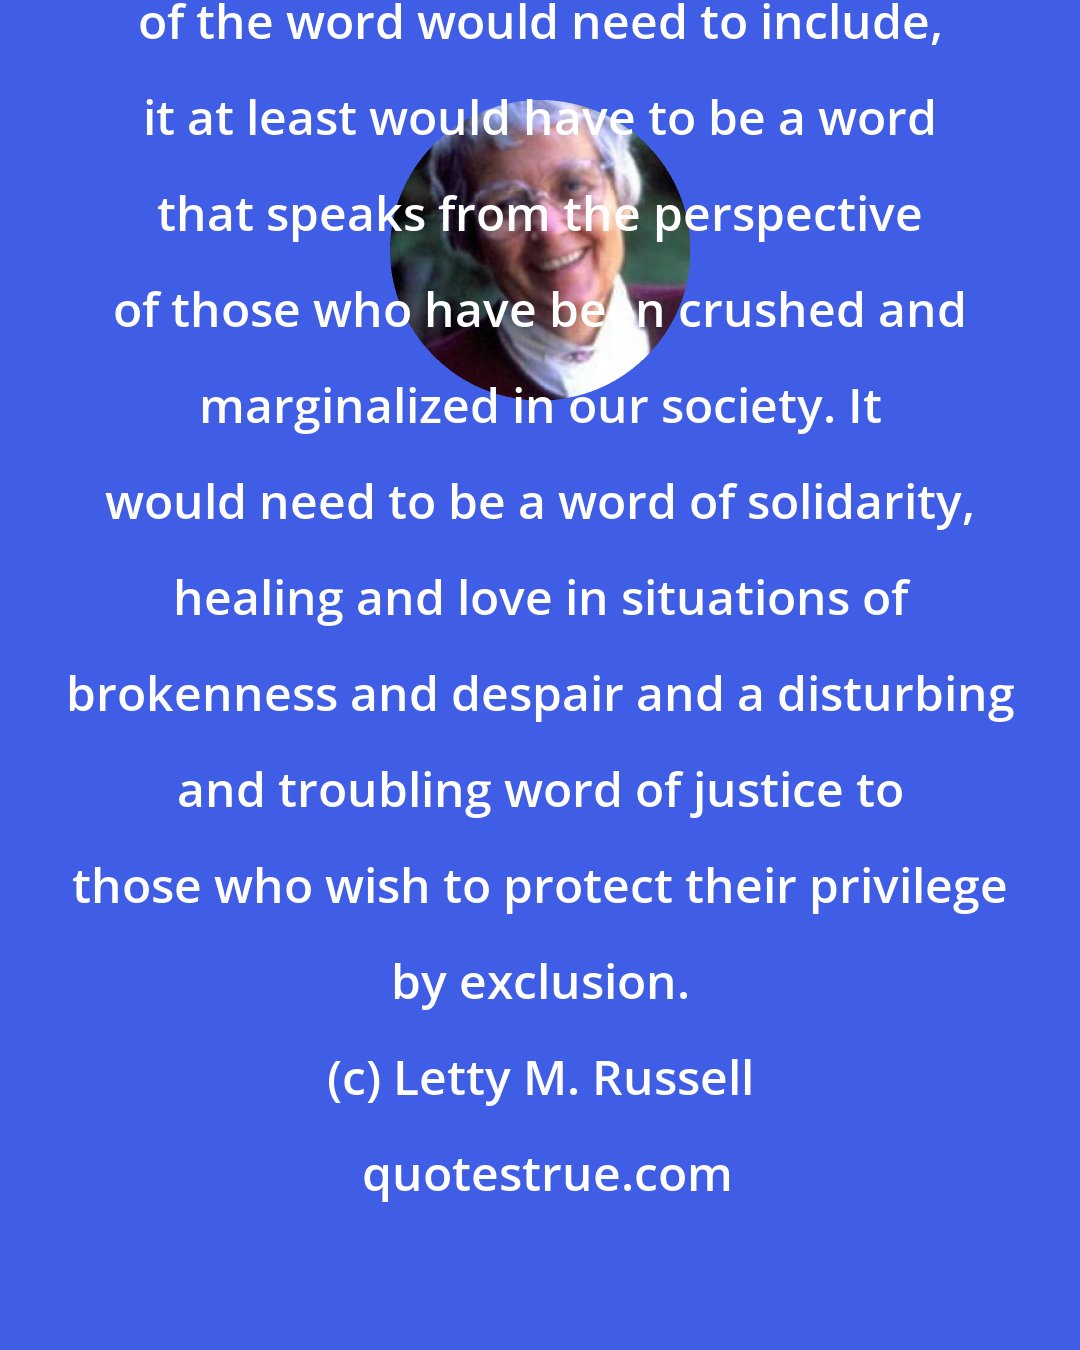 Letty M. Russell: Whatever else the true preaching of the word would need to include, it at least would have to be a word that speaks from the perspective of those who have been crushed and marginalized in our society. It would need to be a word of solidarity, healing and love in situations of brokenness and despair and a disturbing and troubling word of justice to those who wish to protect their privilege by exclusion.